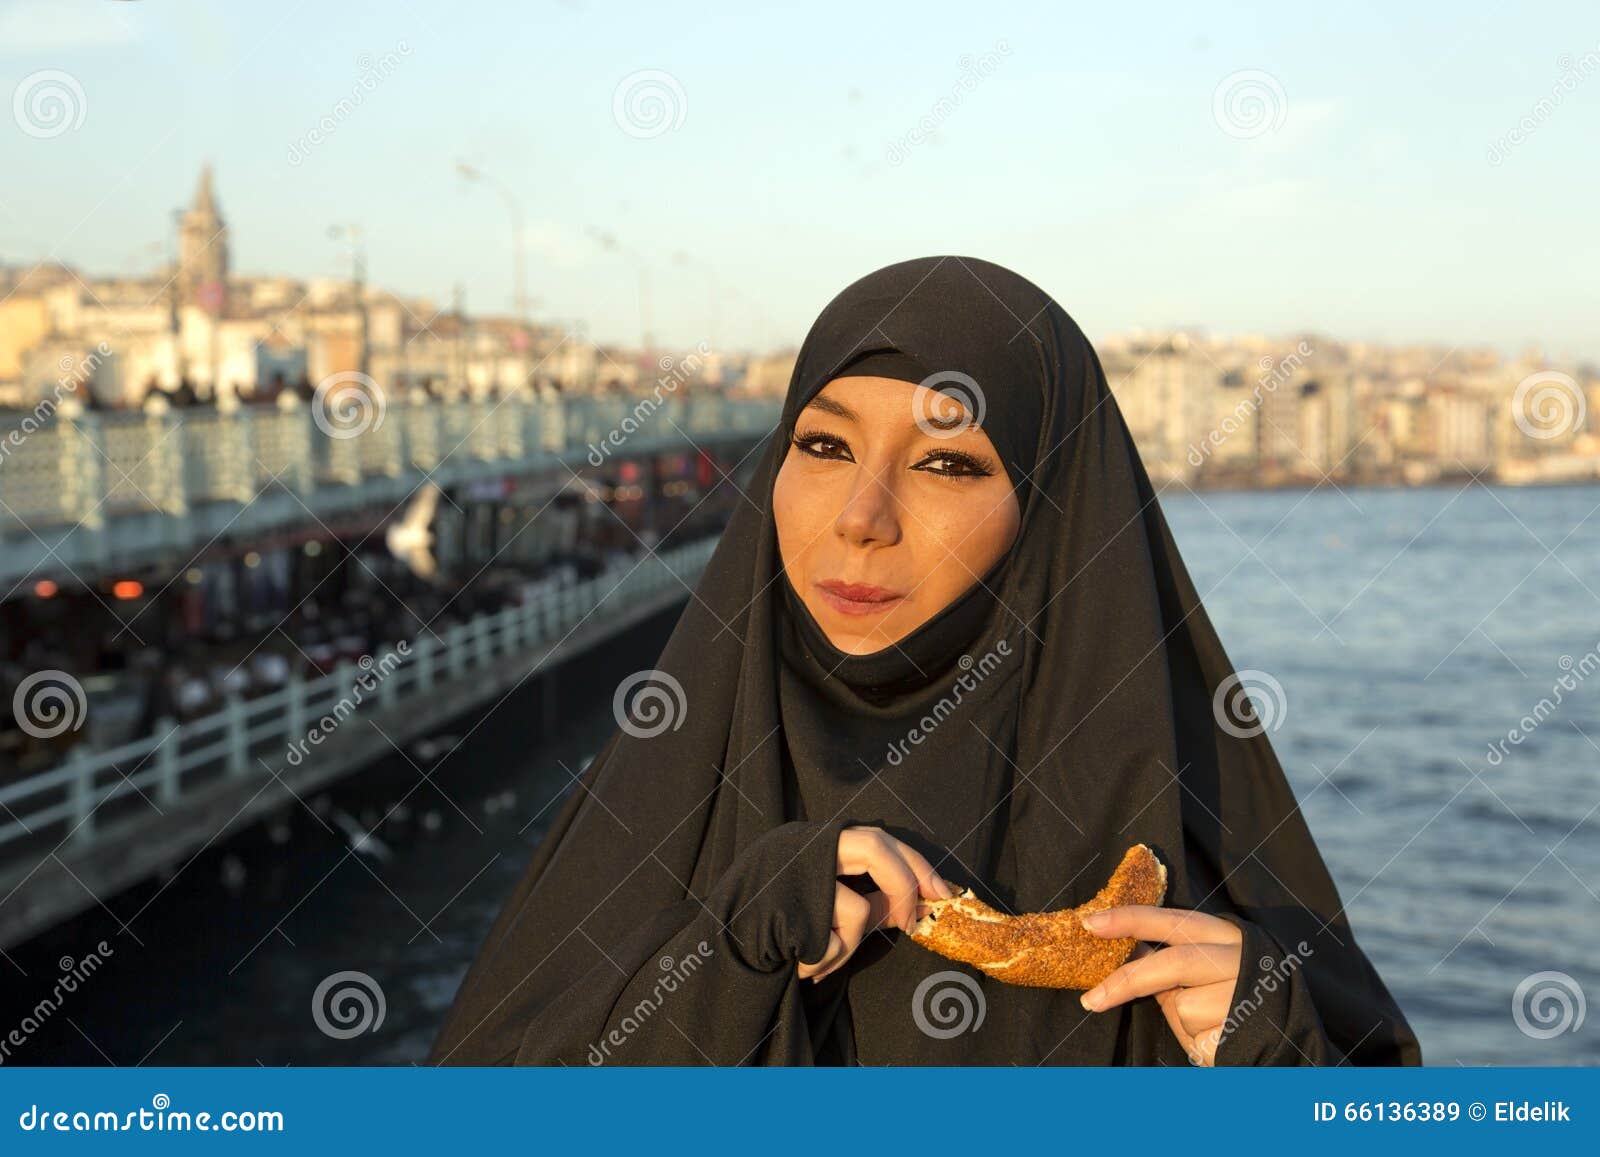 Woman Dressed With Black Headscarf, Chador On Istanbul 